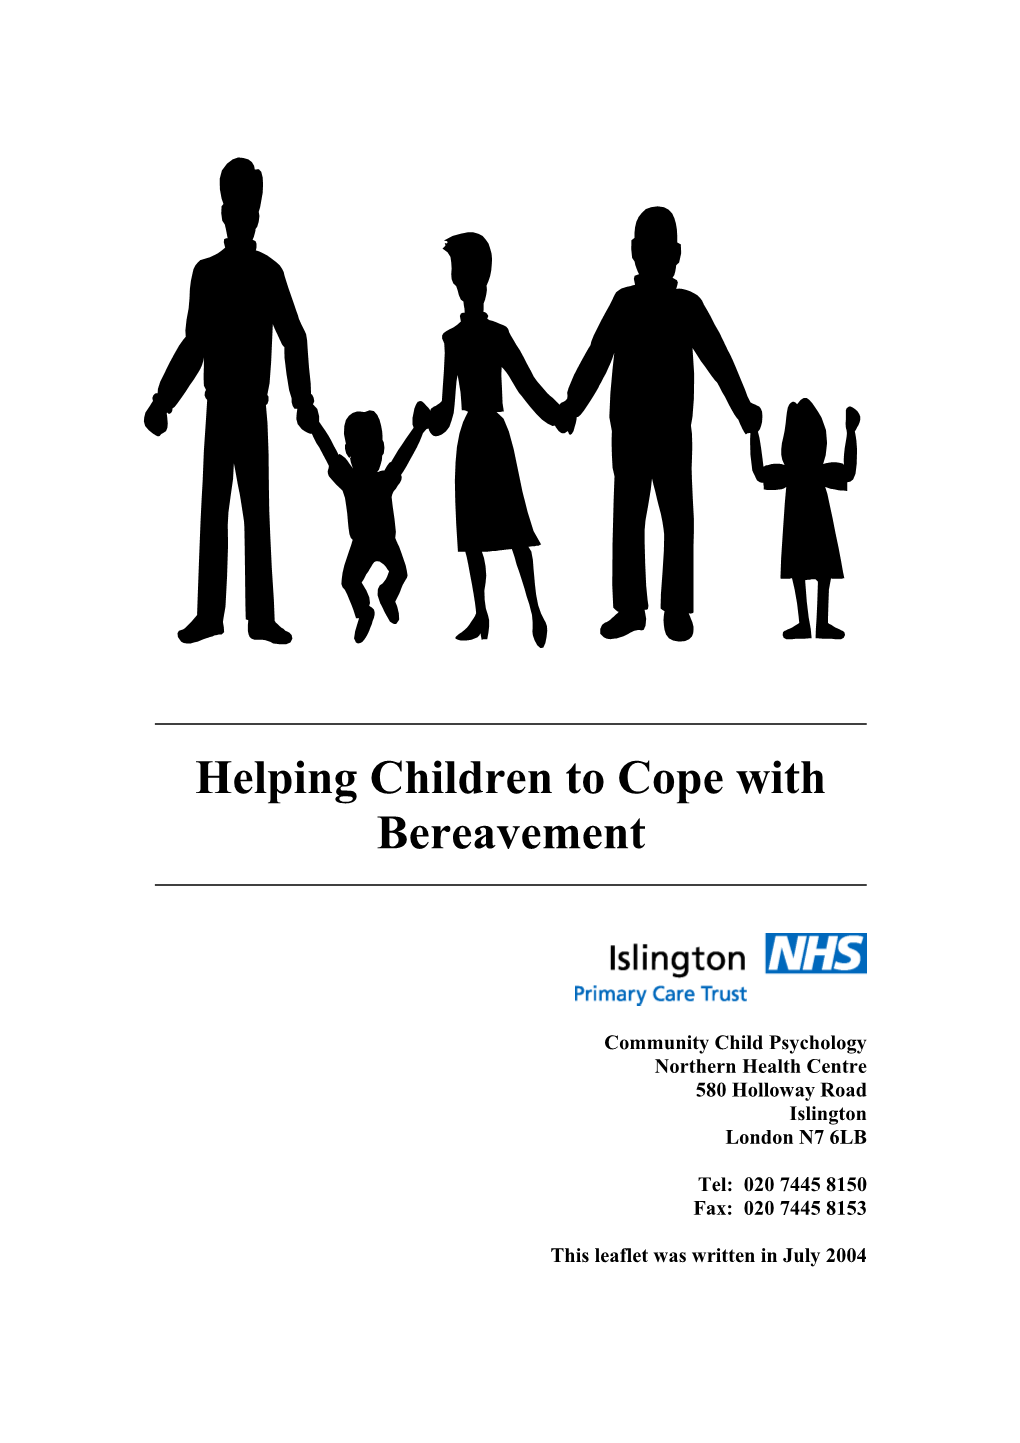 Helping Children to Cope with Bereavement